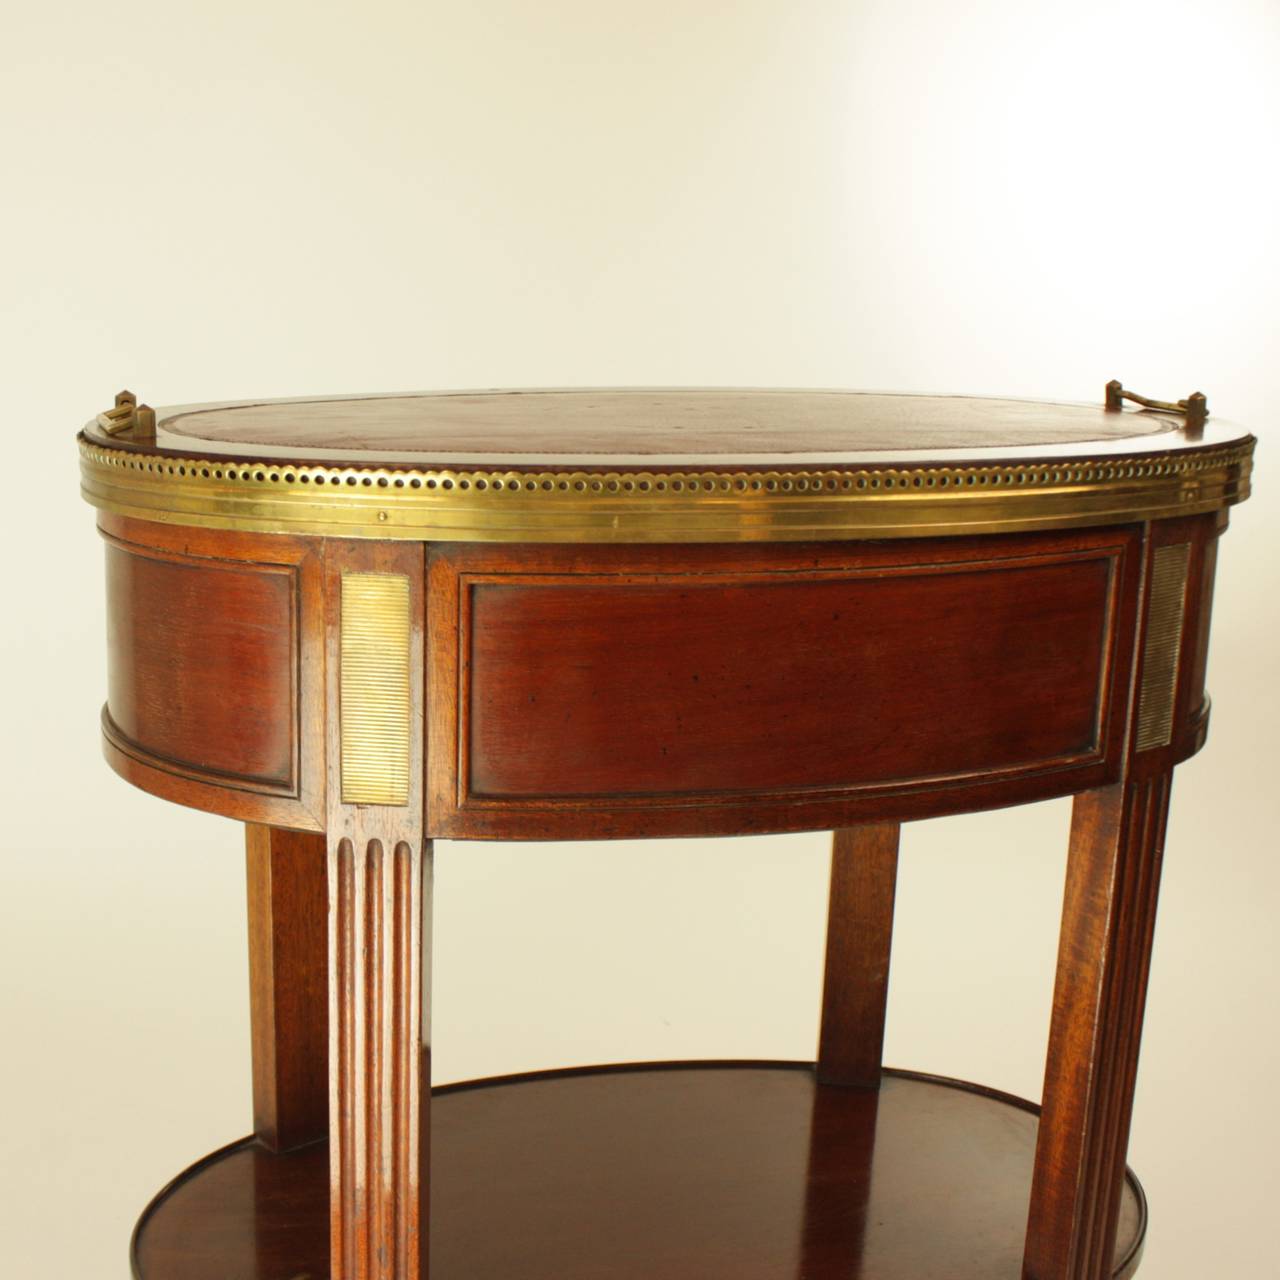 Late 18th Century Directoire Brass-Mounted Mahogany Jardiniere Table